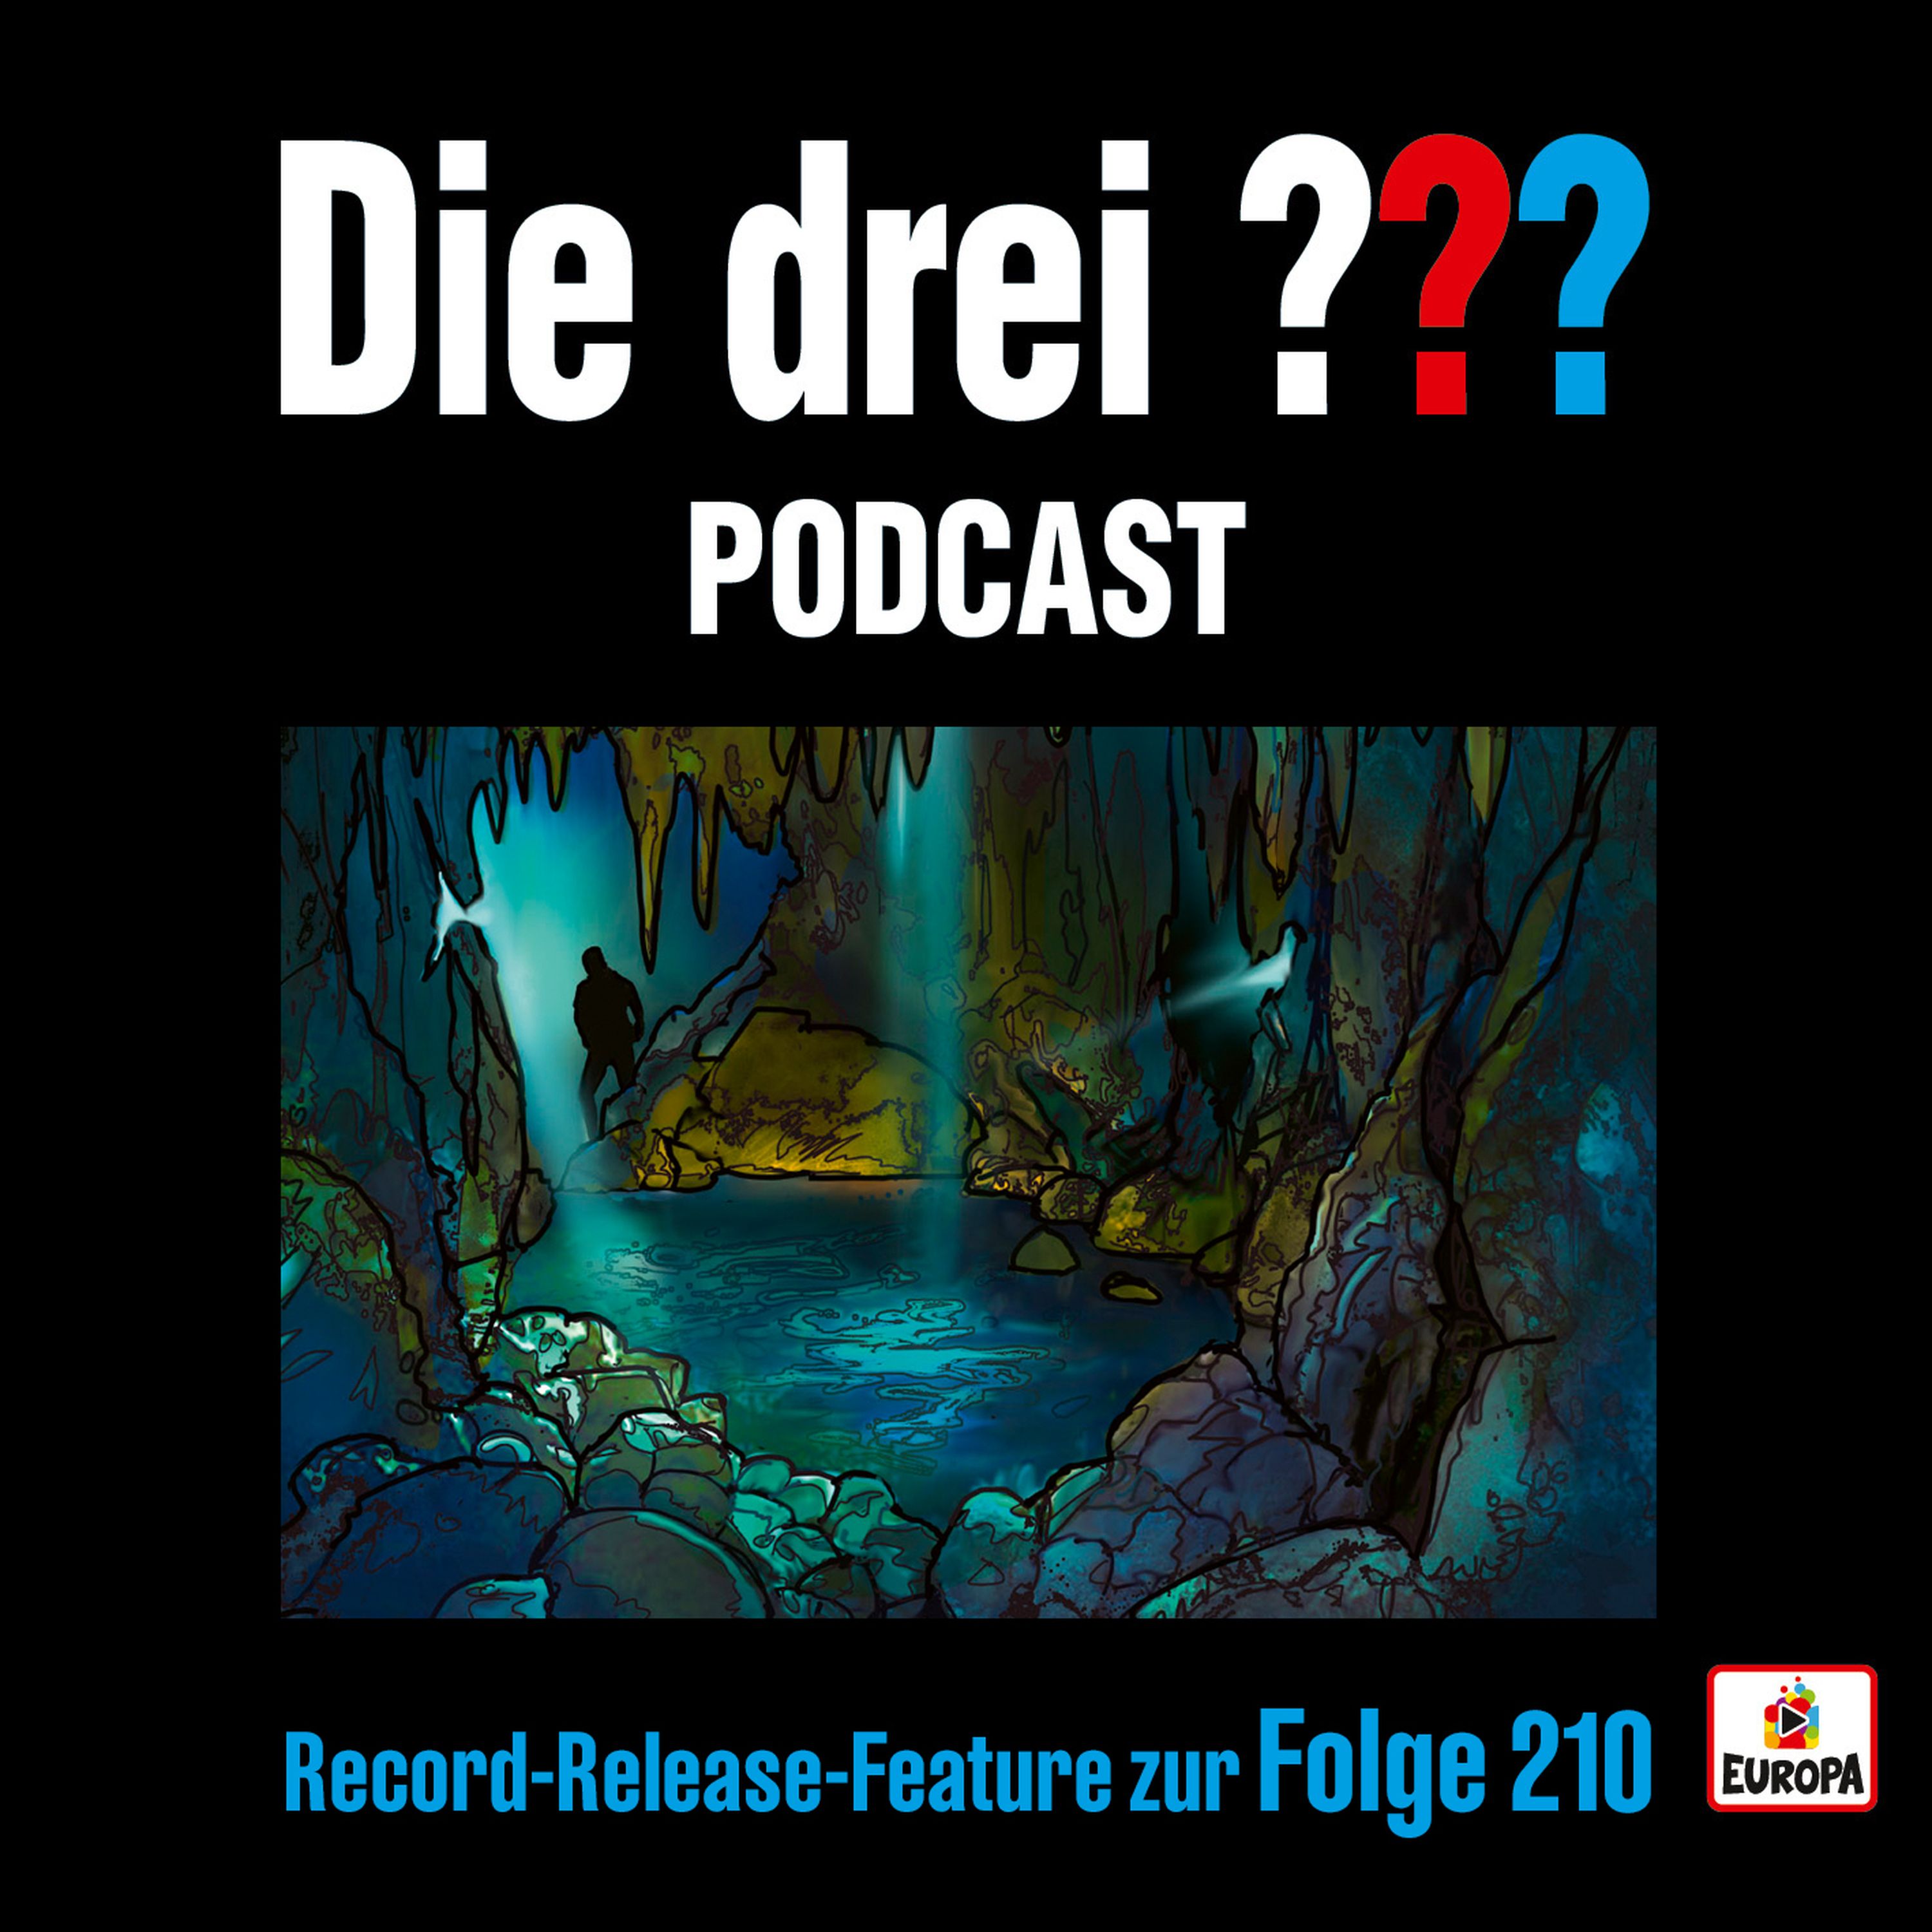 Record-Release-Feature zur Folge 210